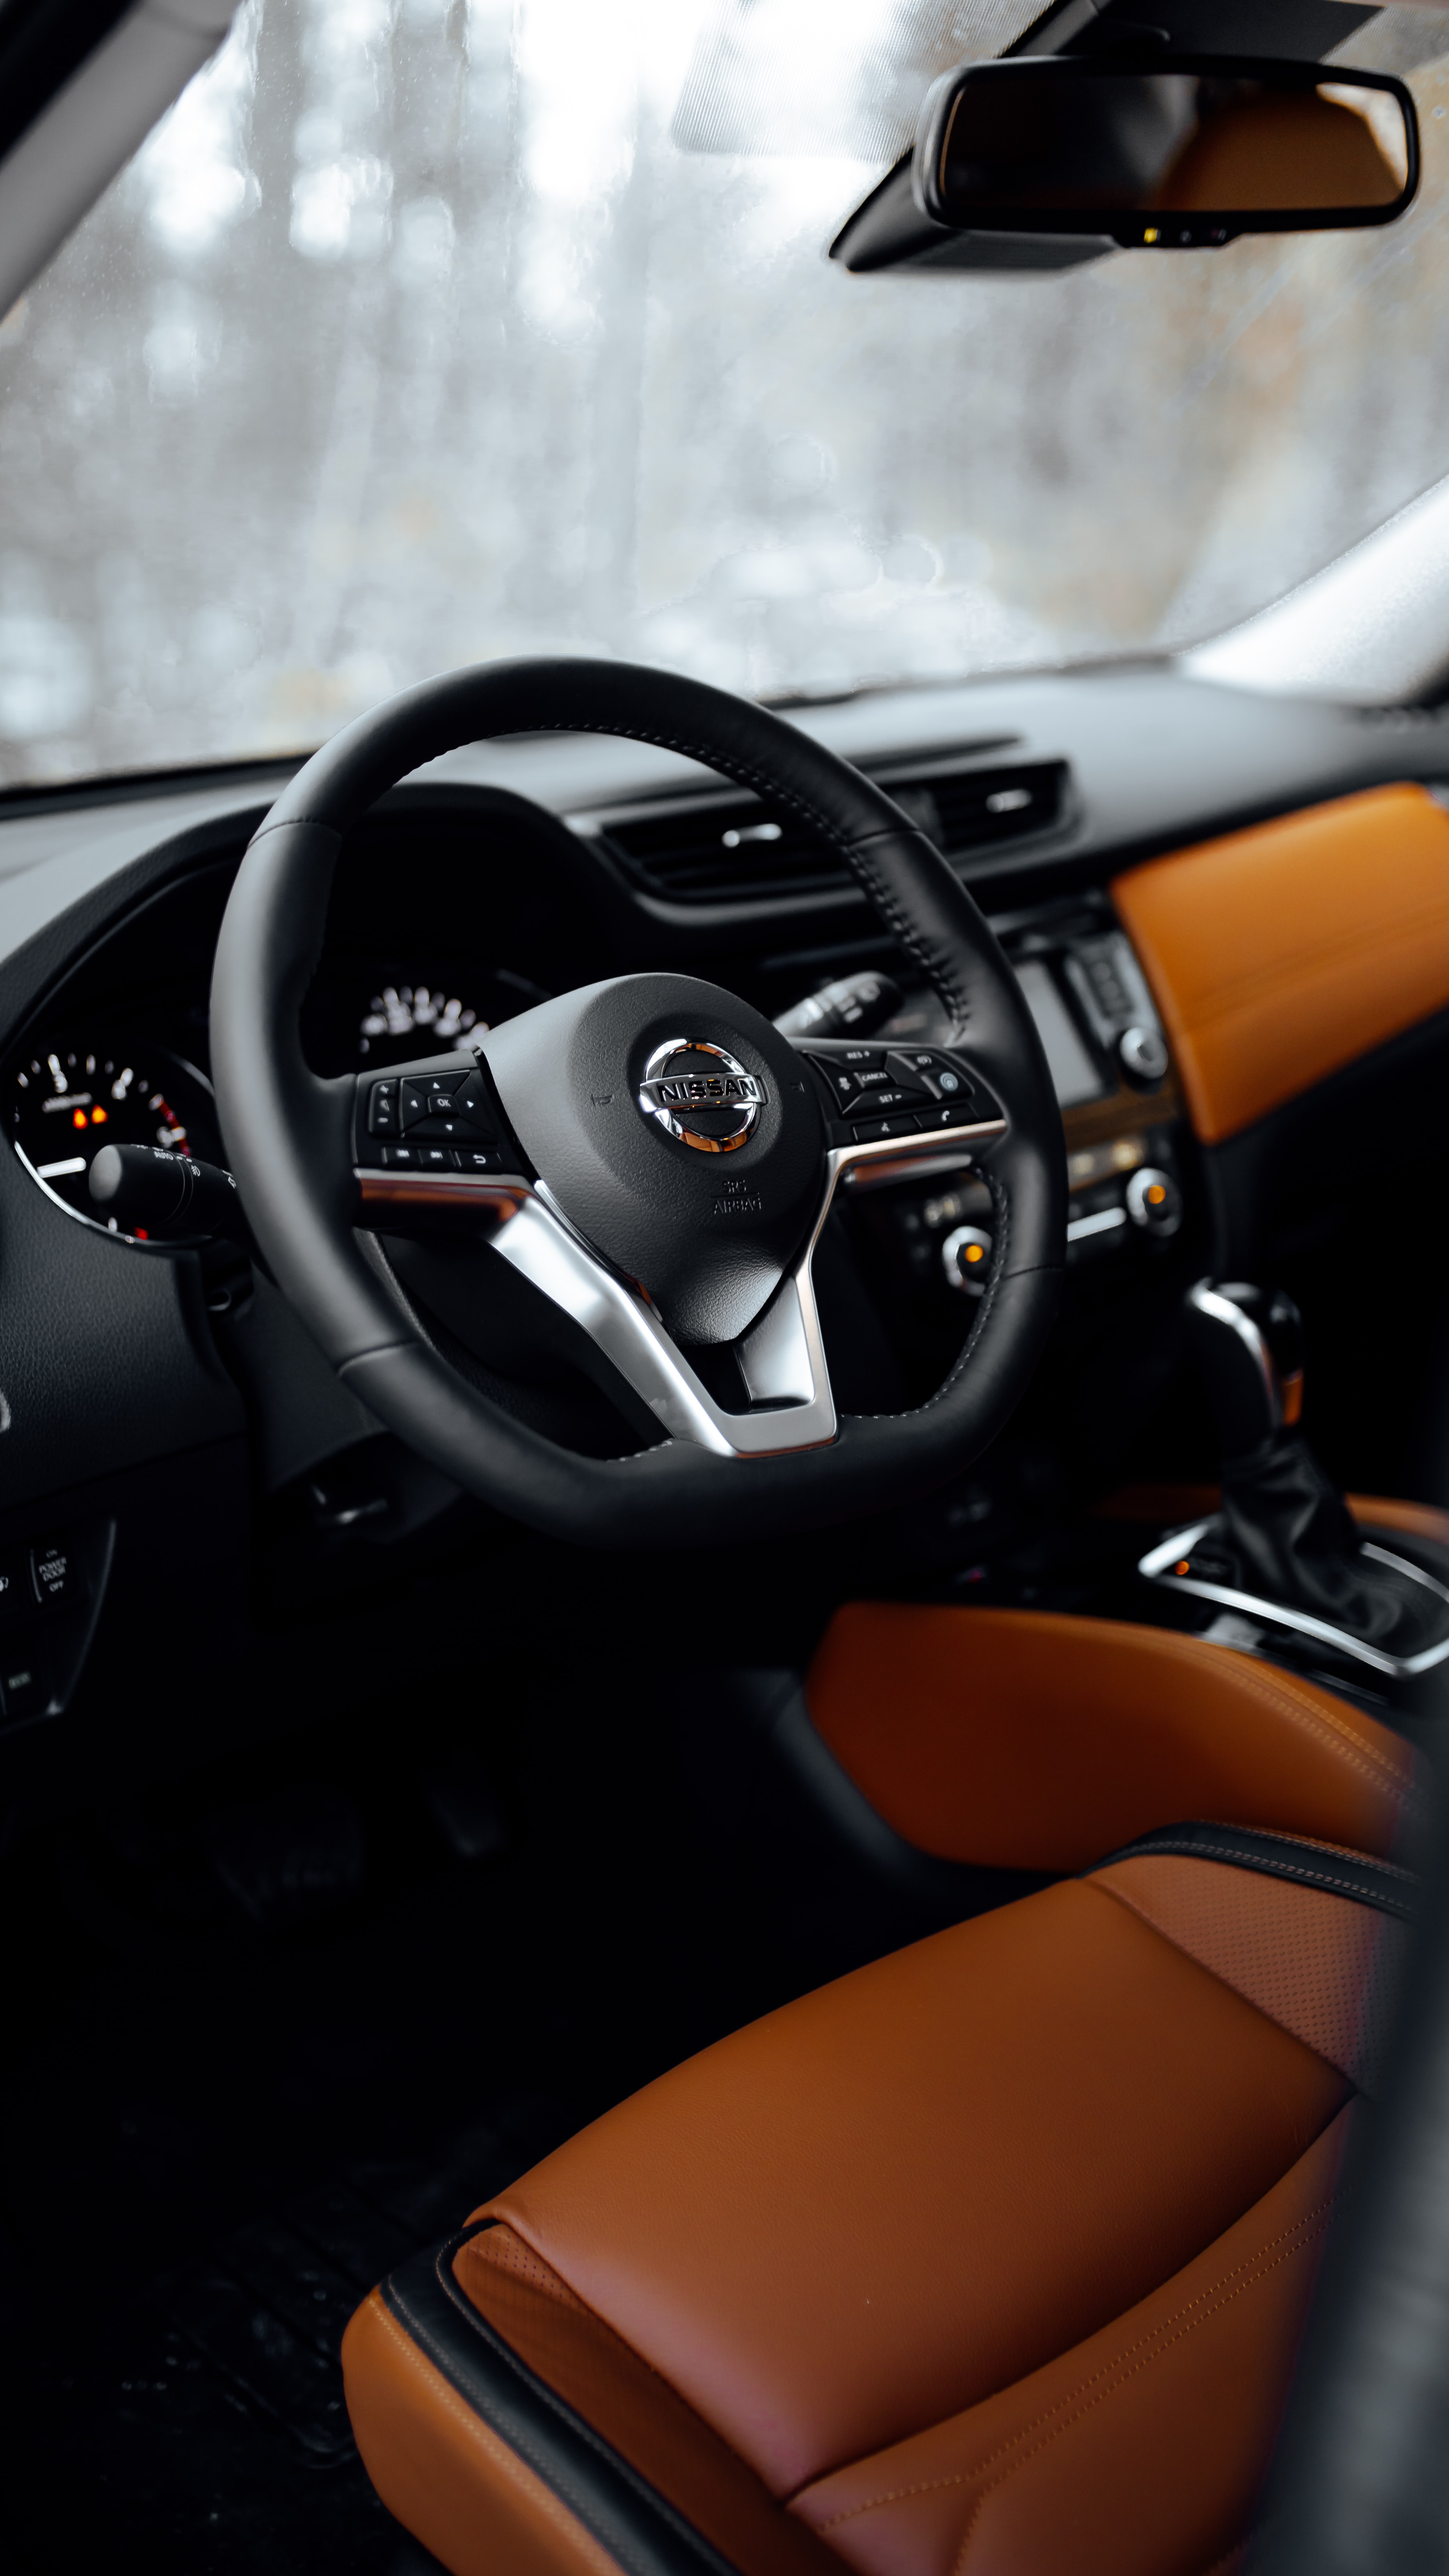 143889 Screensavers and Wallpapers Steering Wheel for phone. Download nissan, cars, car, steering wheel, rudder, salon pictures for free